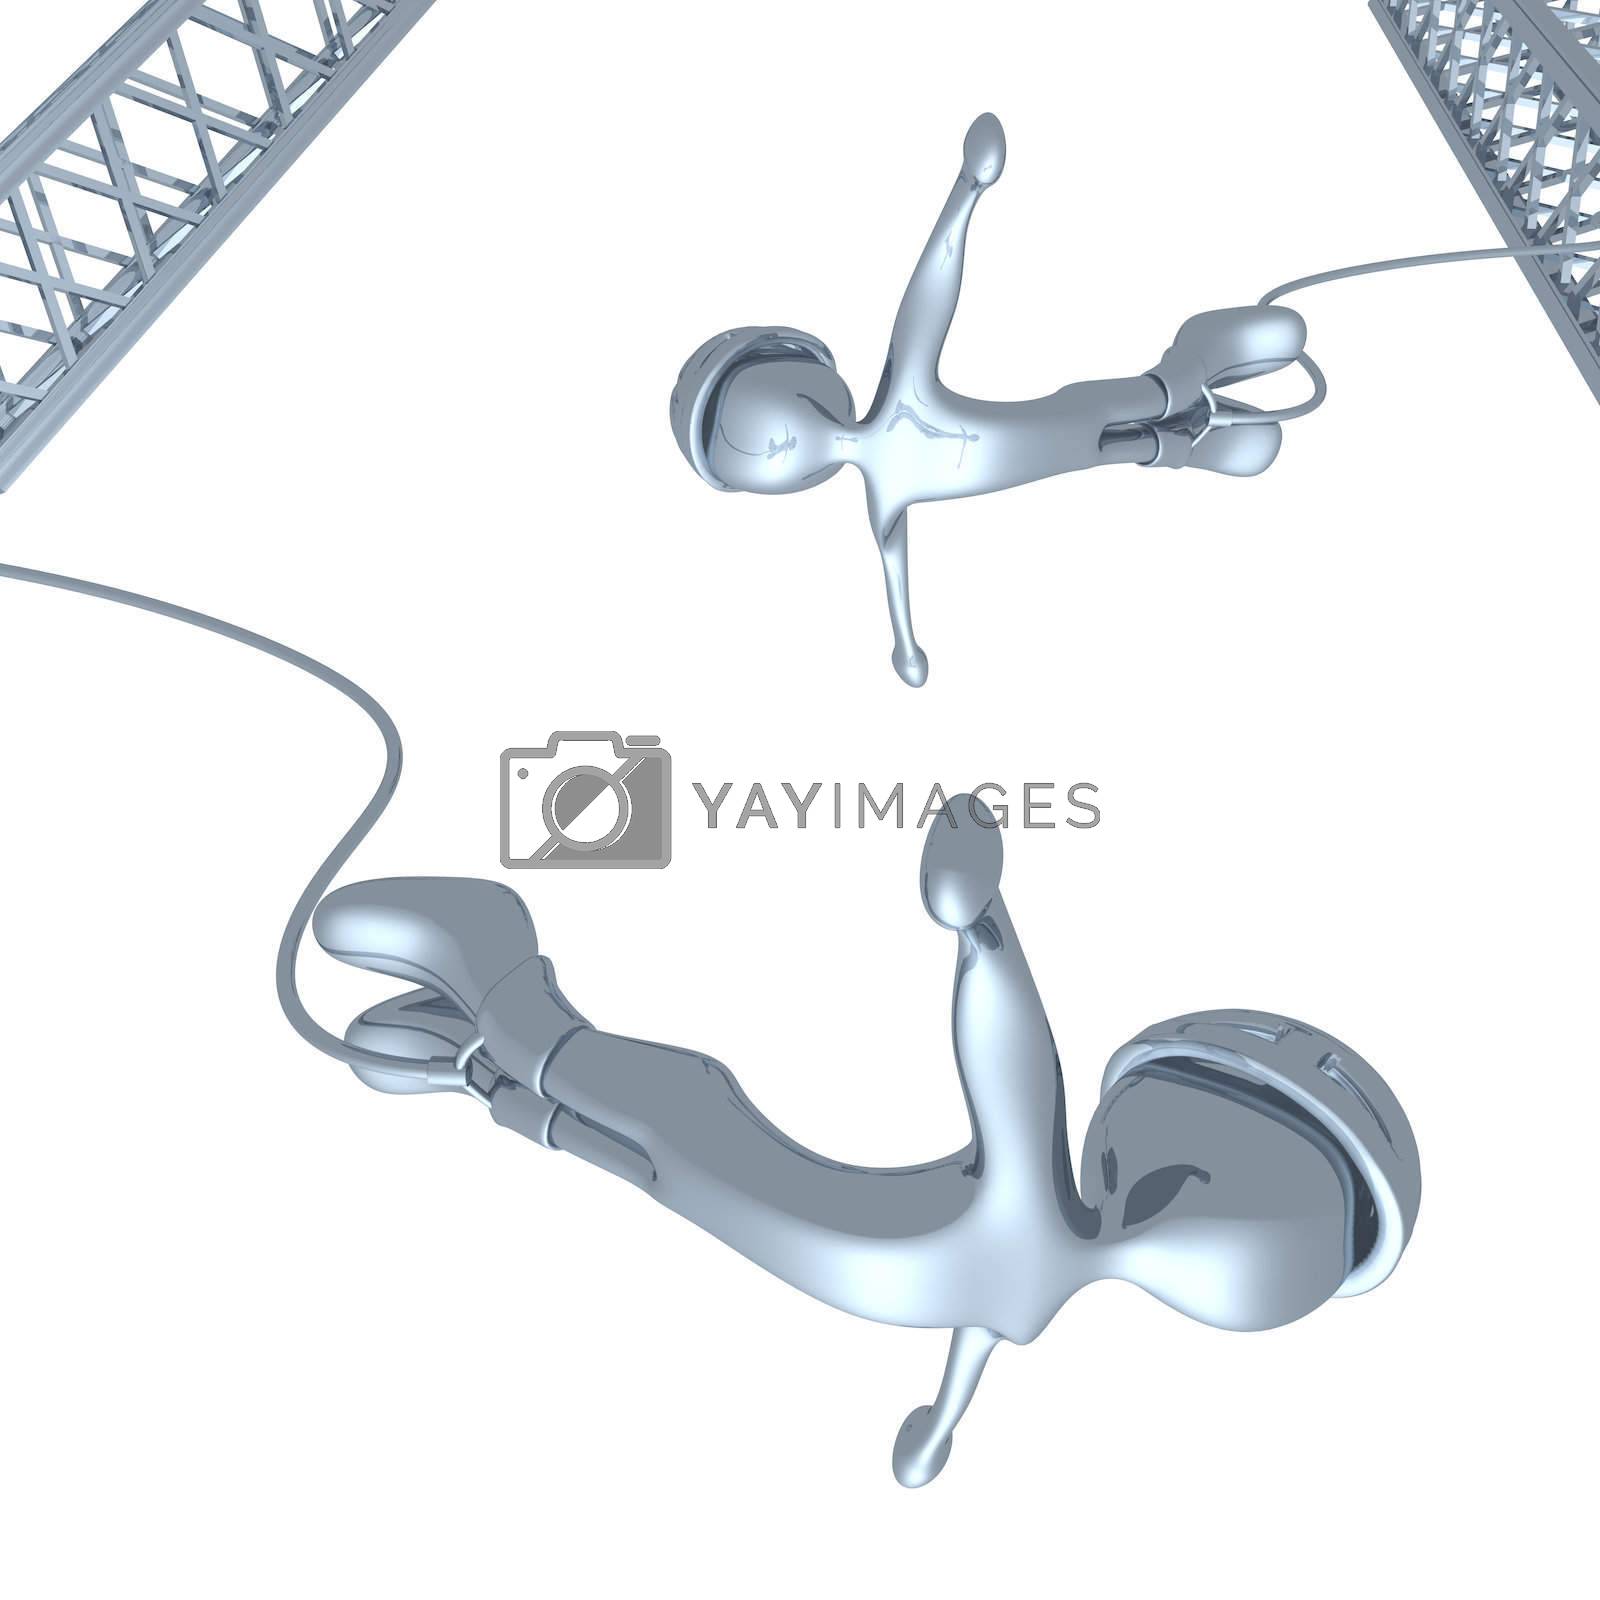 Royalty free image of Bungee Jumping by 3pod